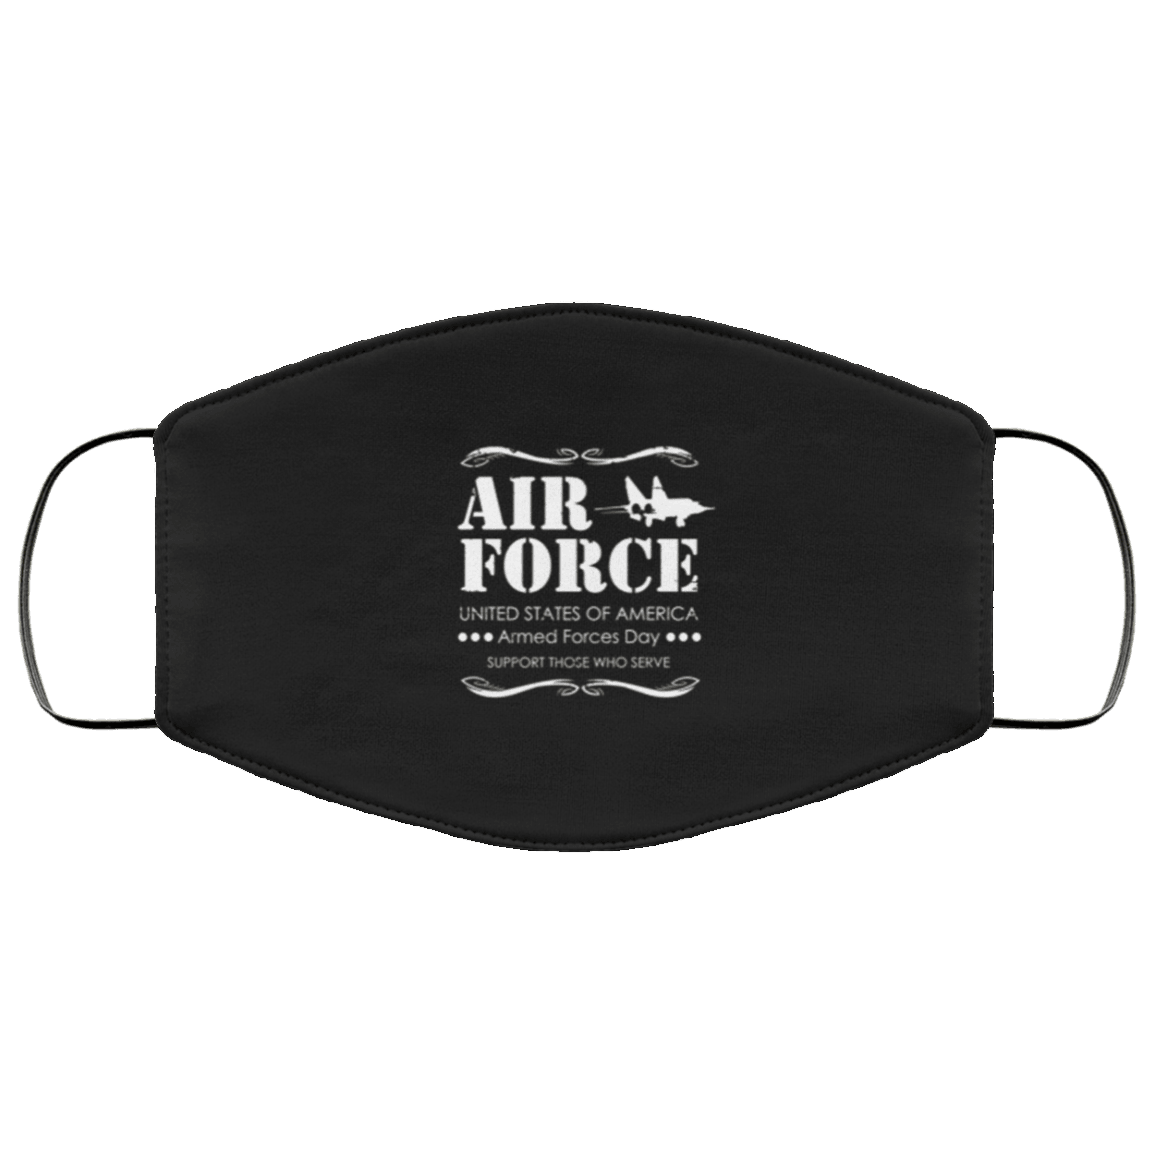 Designs by MyUtopia Shout Out:US Air Force Support Those Who Serve Armed Forces Day Adult Fabric Face Mask with Elastic Ear Loops,3 Layer Fabric Face Mask / Black / Adult,Fabric Face Mask